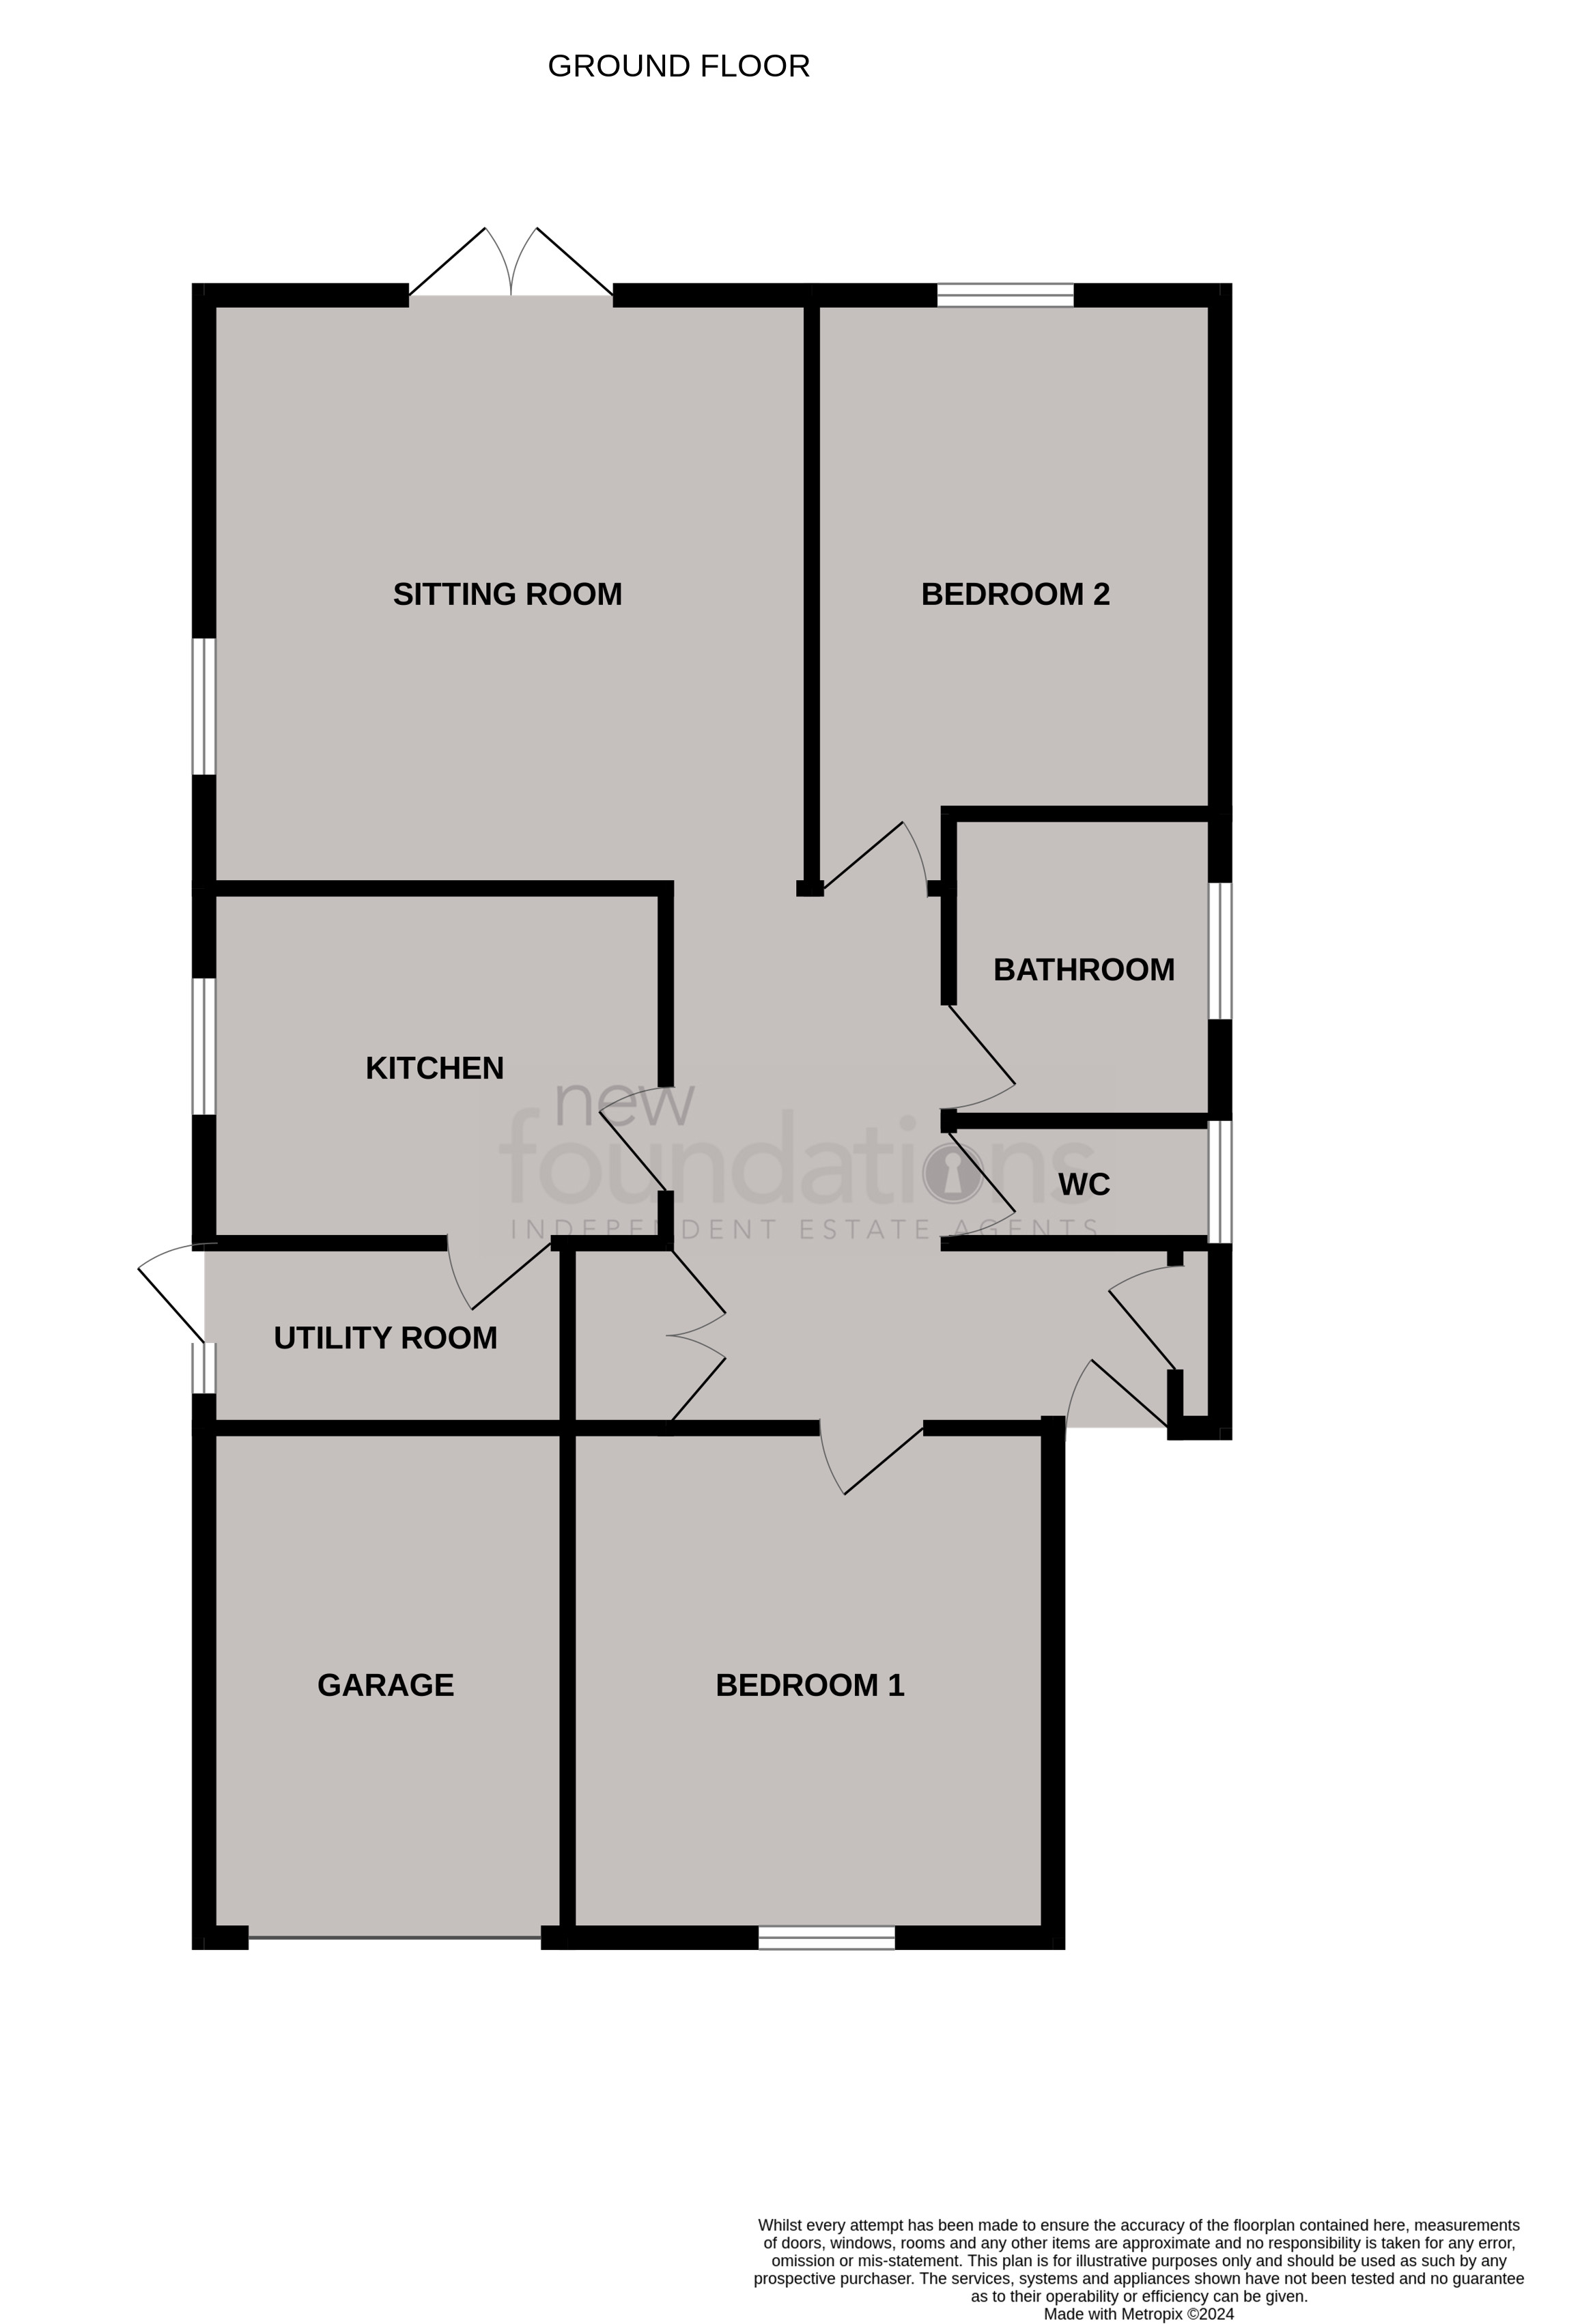 Floorplans For Collington Lane West, Bexhill-on-Sea, East Sussex